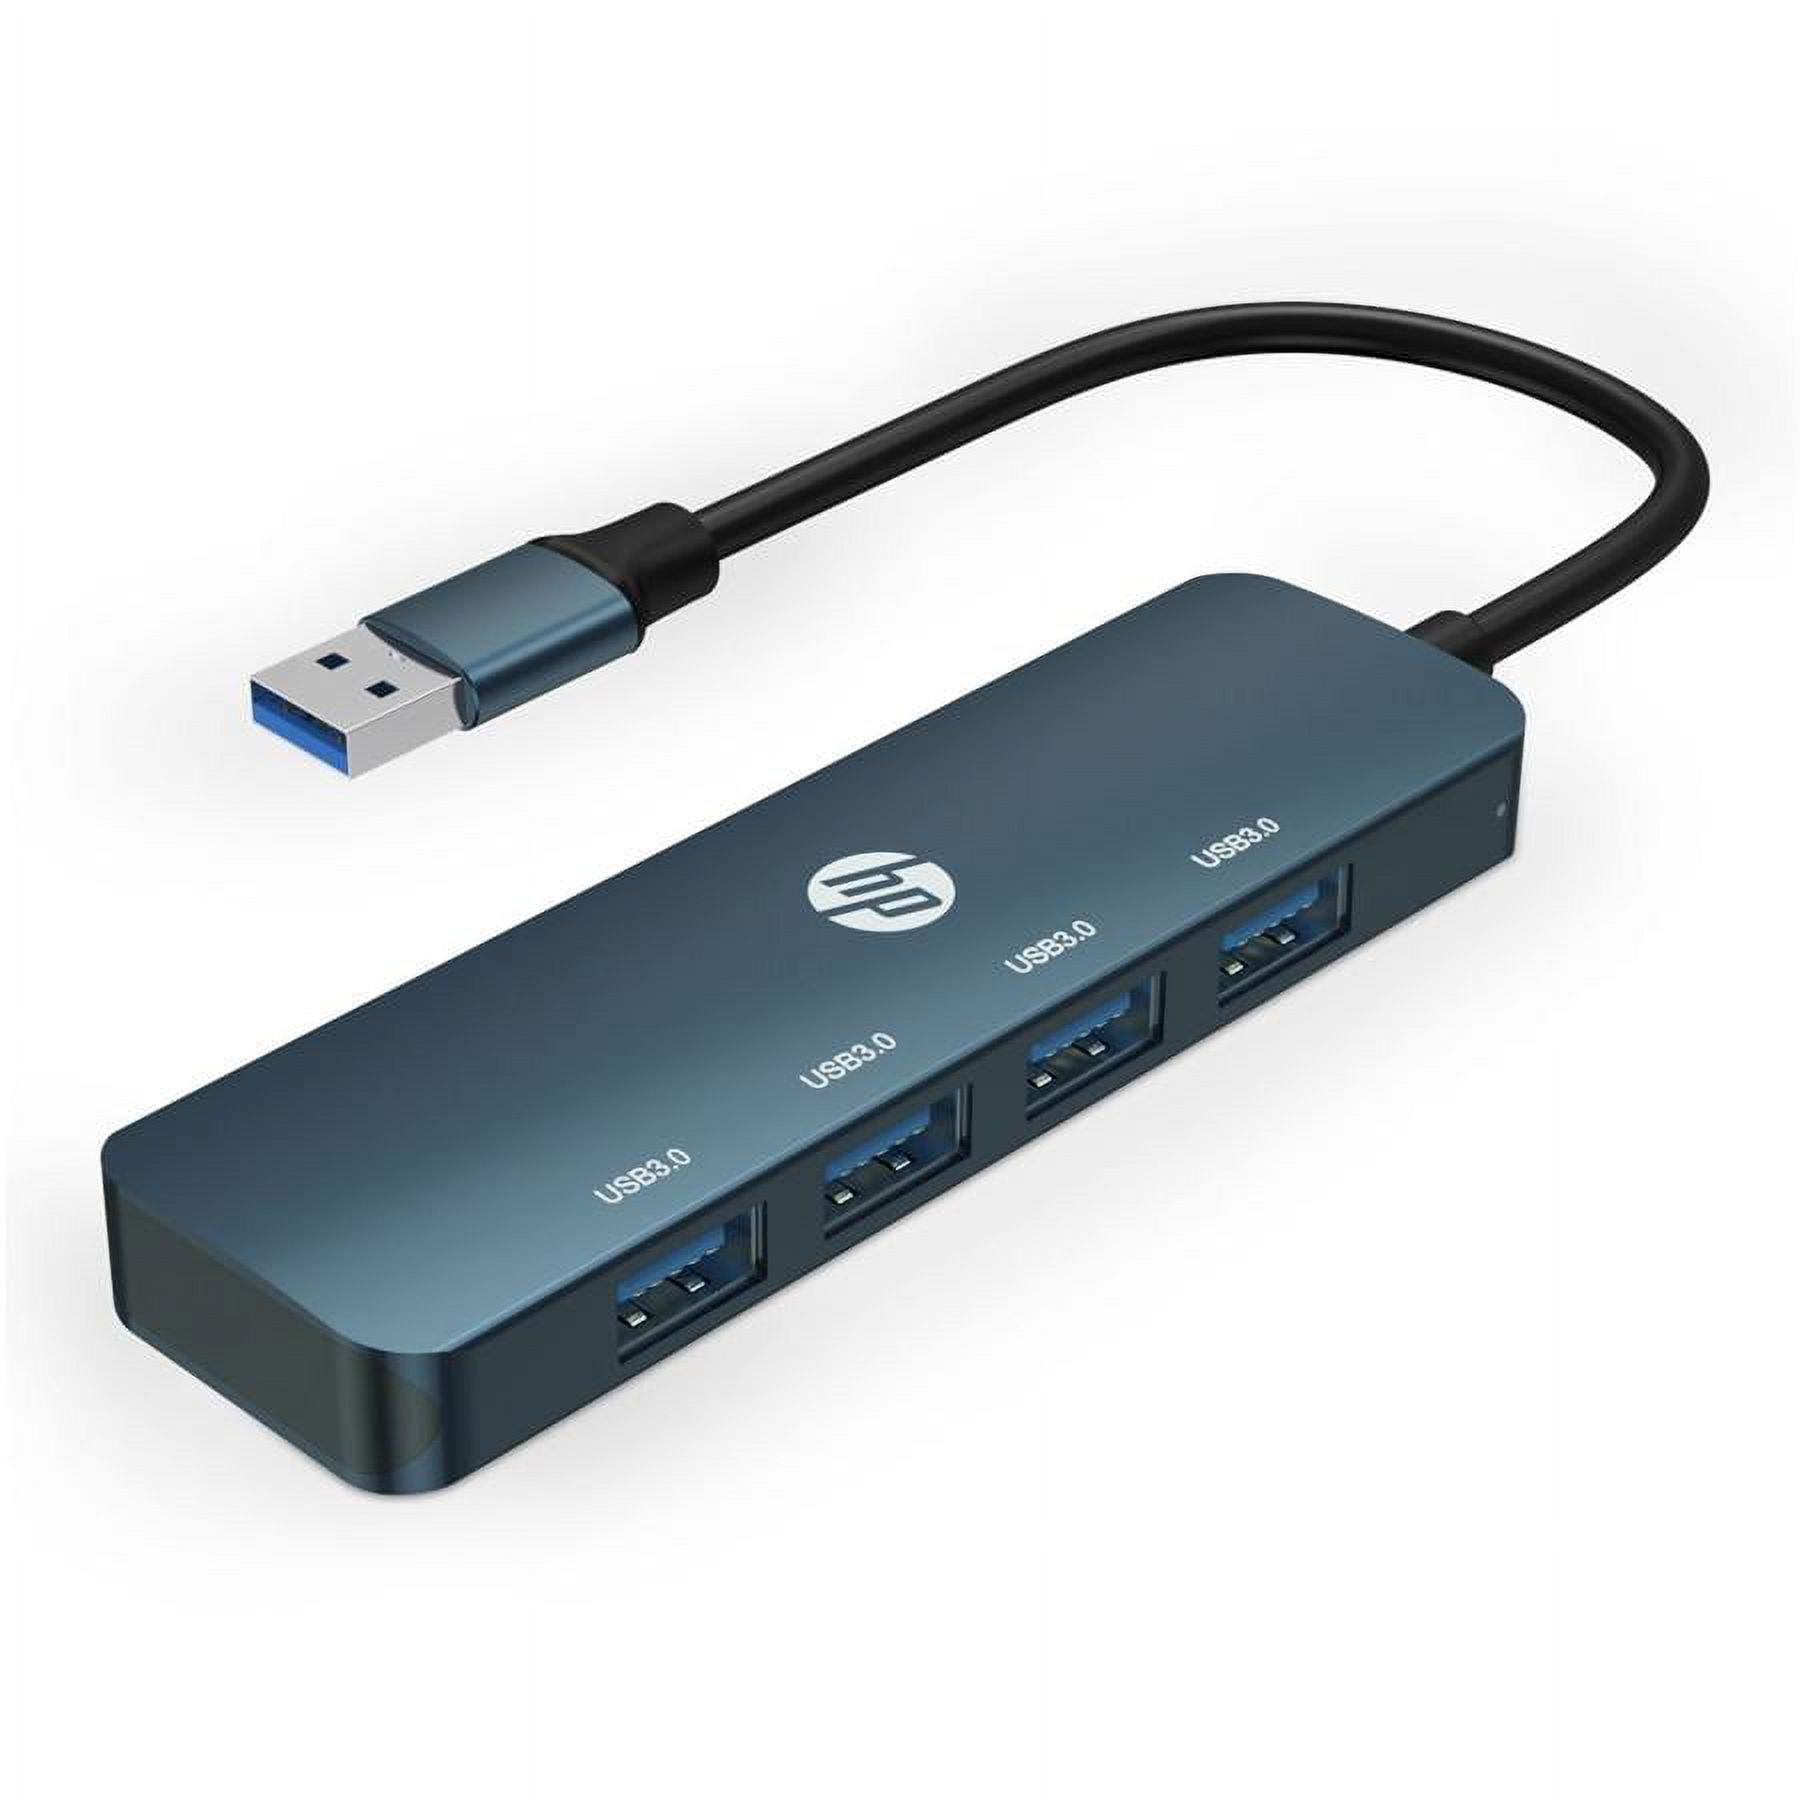 HP - 4 Port USB 3.0 Hub, Up to 5Gbps, Compatible with USB2.0 / USB1.1 for Mac, PC or Mobile Hard Drive, Black - image 1 of 5